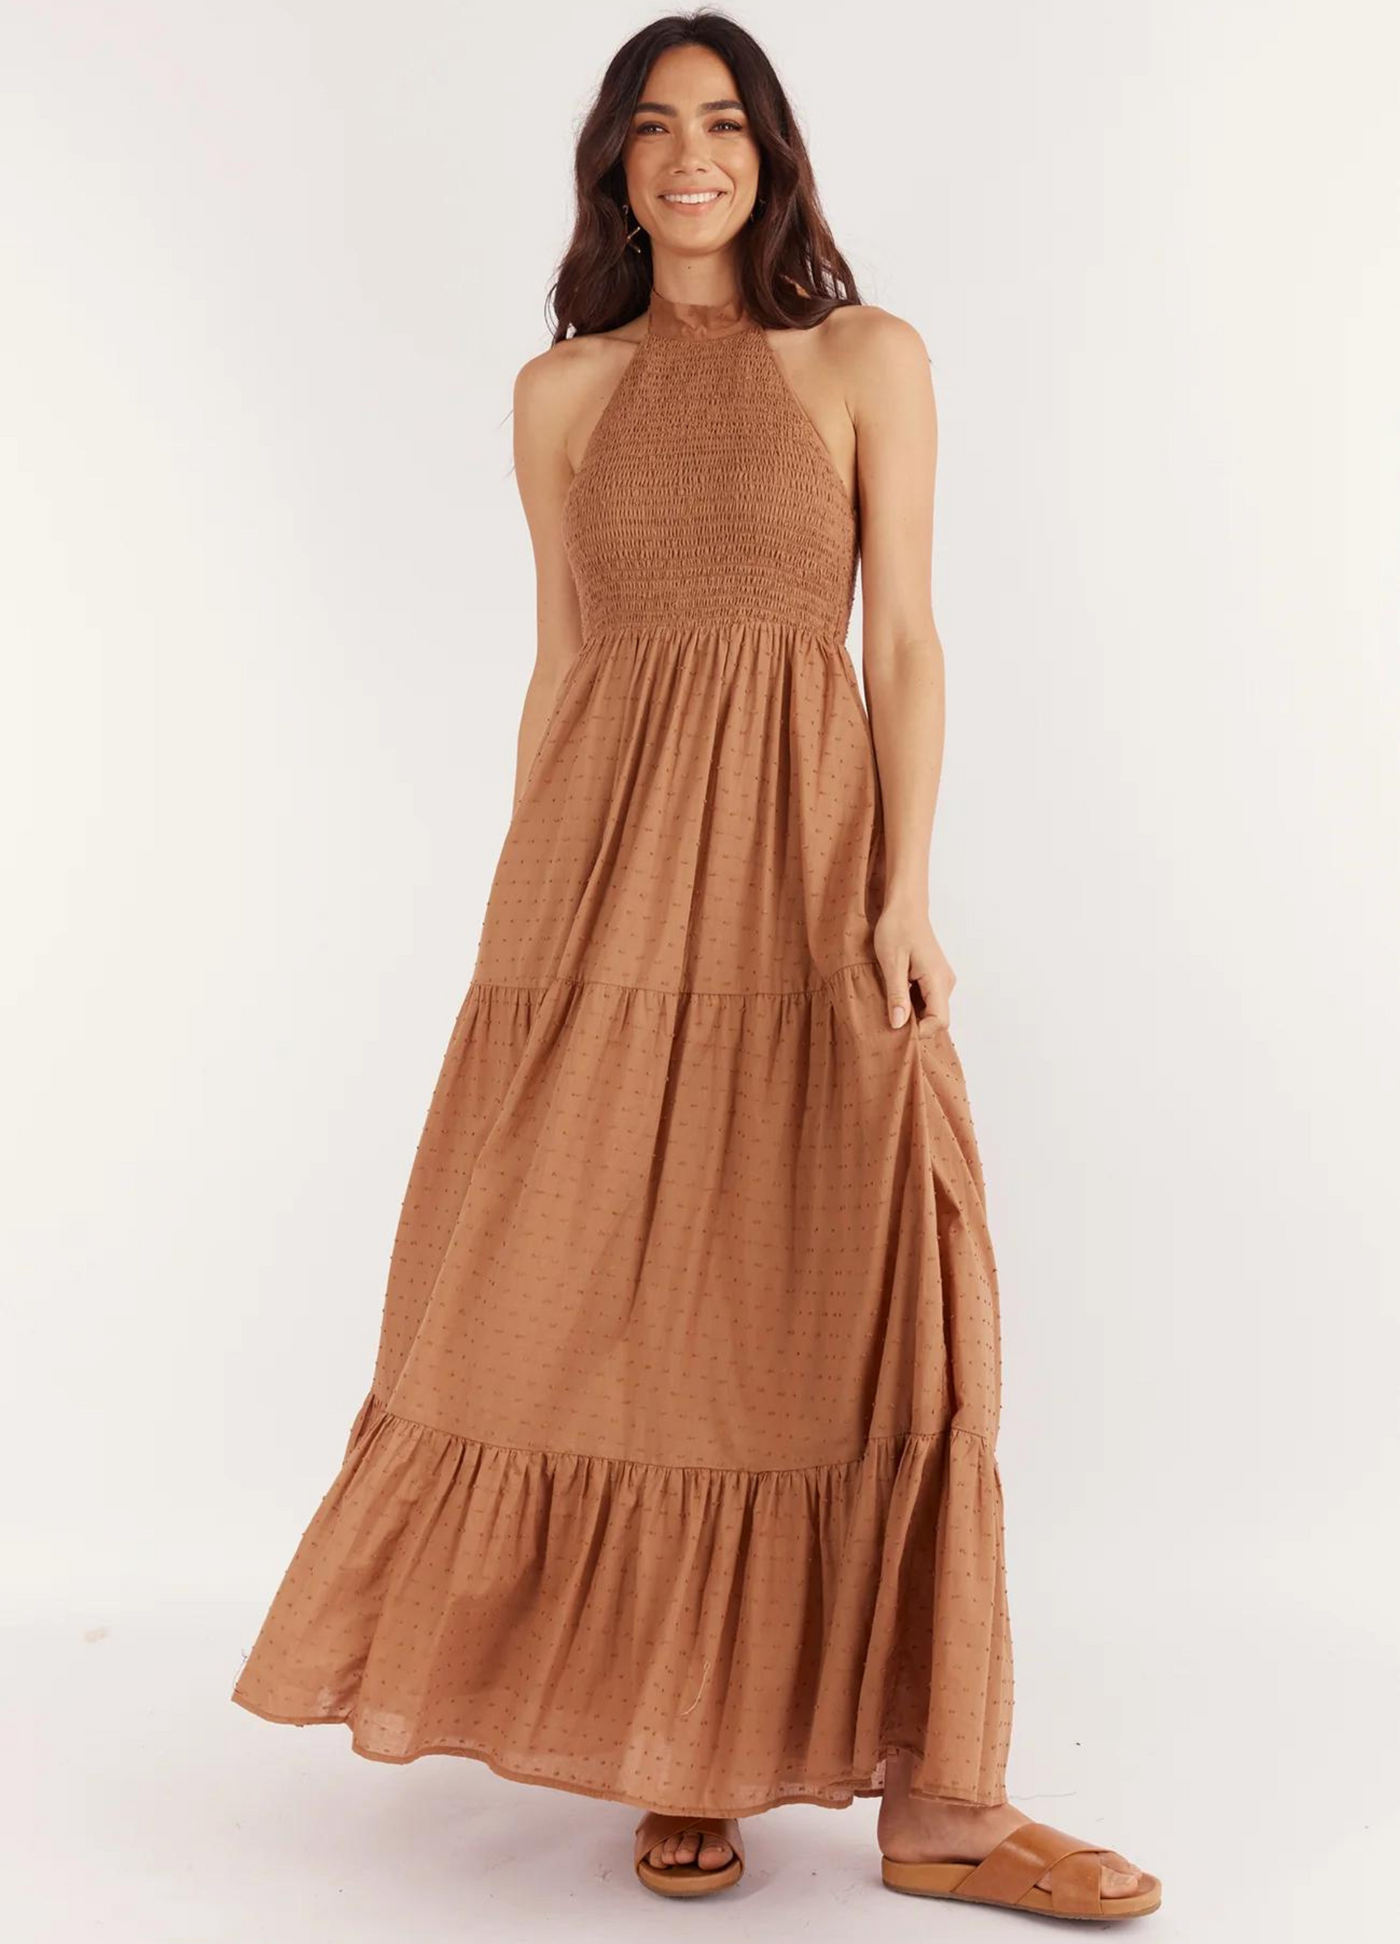 Halterneck maxi dress in brown spot print fabric with a back neck tie